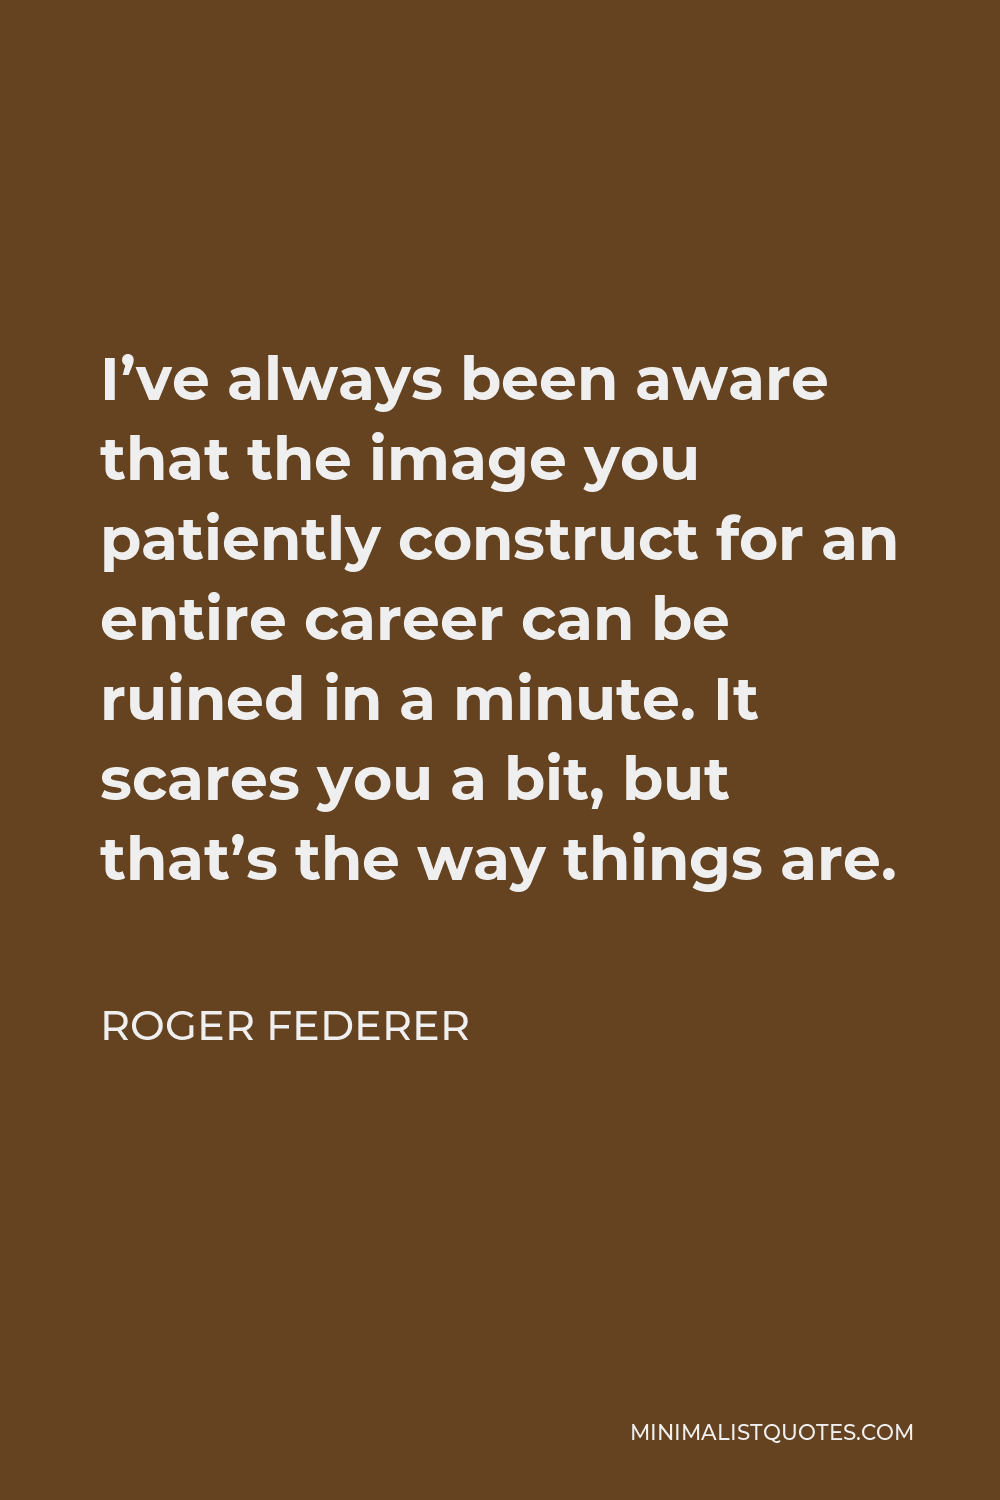 Roger Federer Quote - I’ve always been aware that the image you patiently construct for an entire career can be ruined in a minute. It scares you a bit, but that’s the way things are.